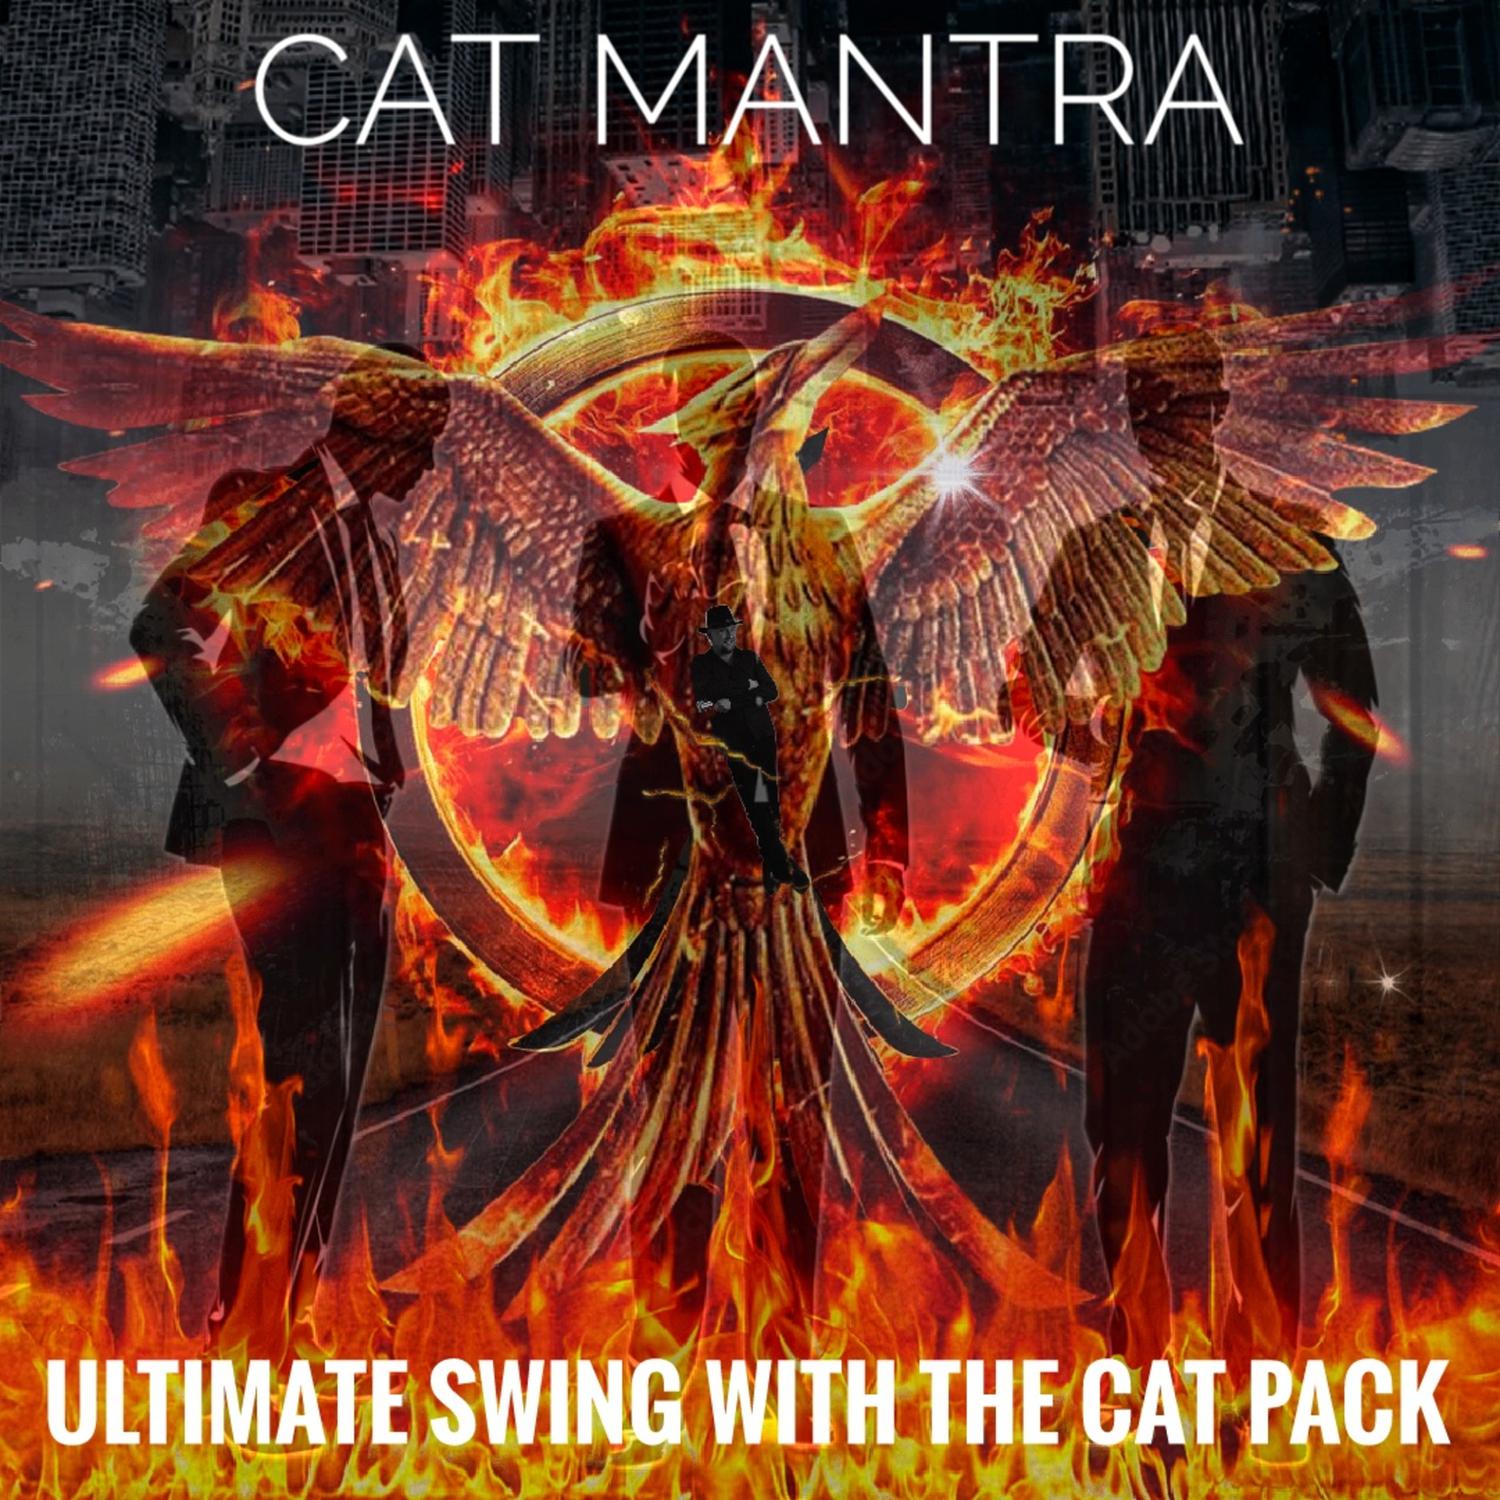 Cat Mantra - Lets Call the Whole Thing Off